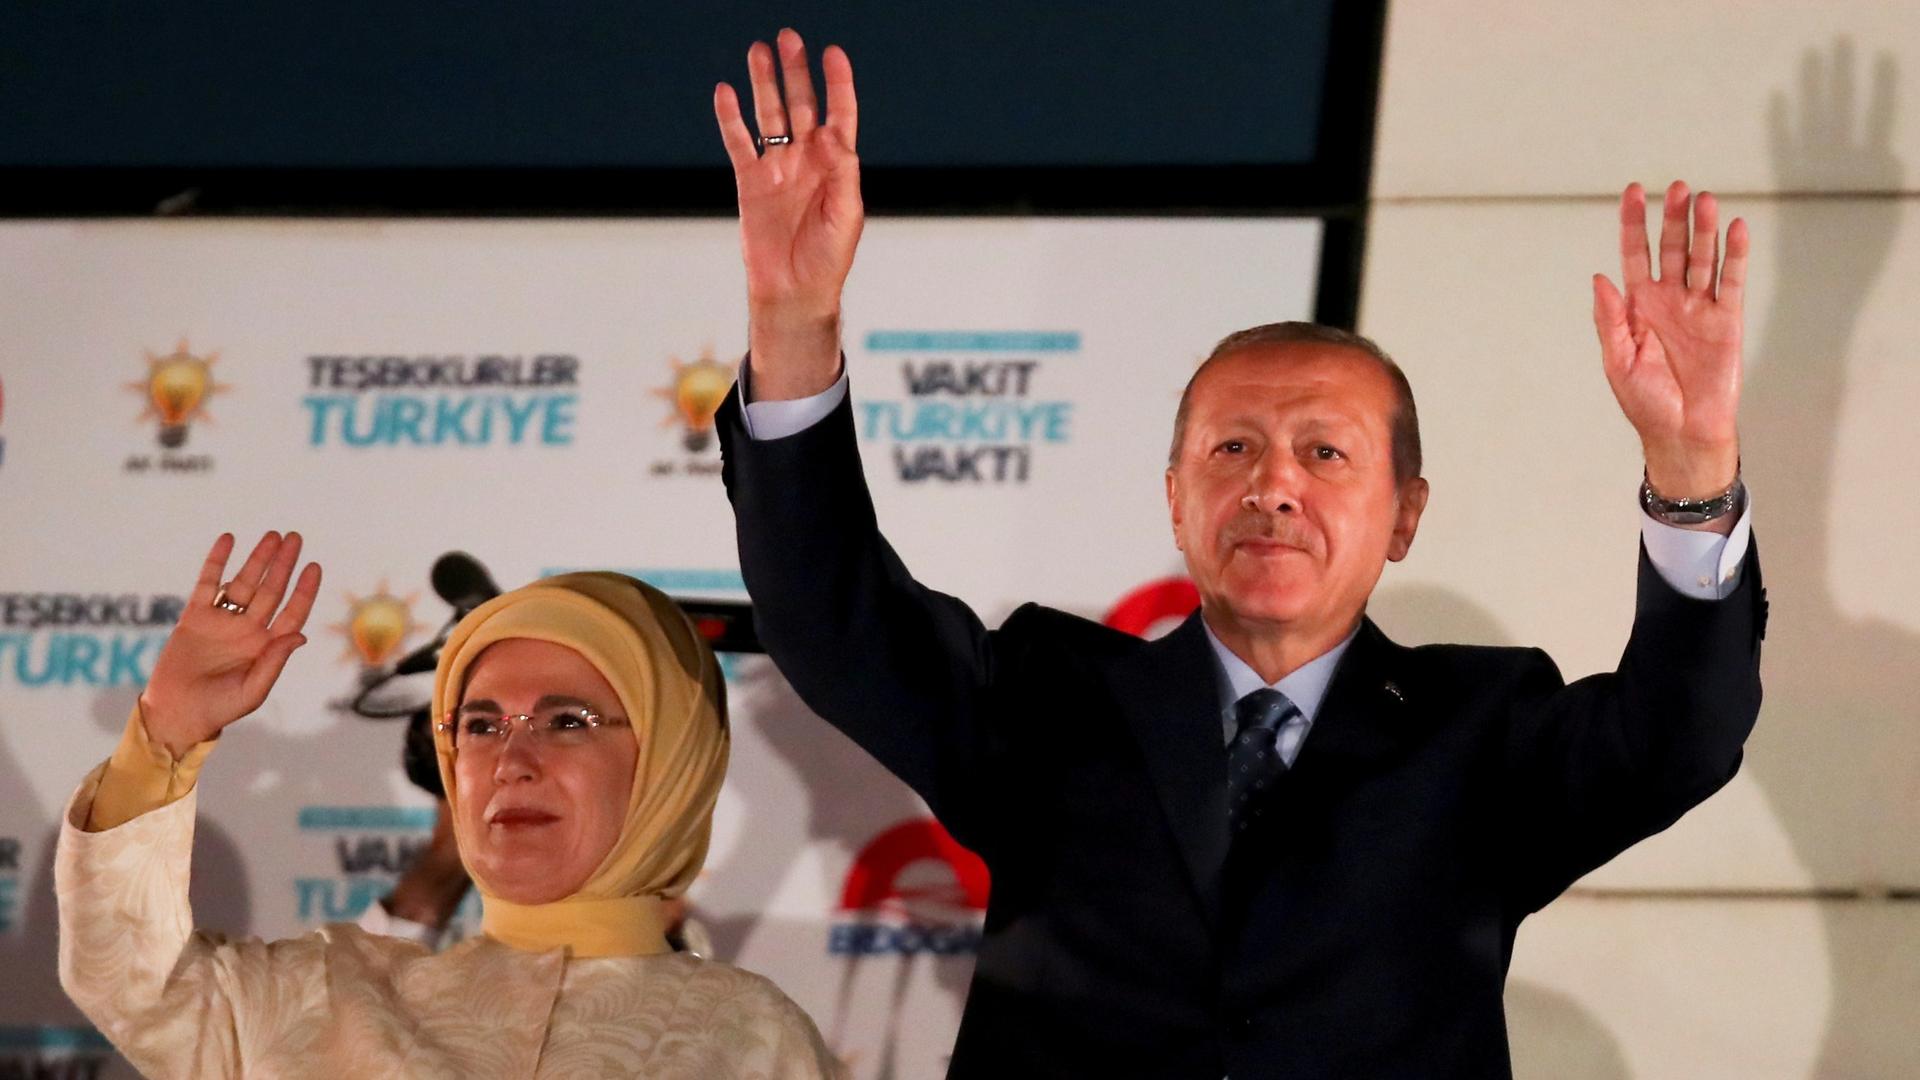 Turkish President Tayyip Erdoğan and his wife Emine Erdogan stand side-by-side with their arms up waving.